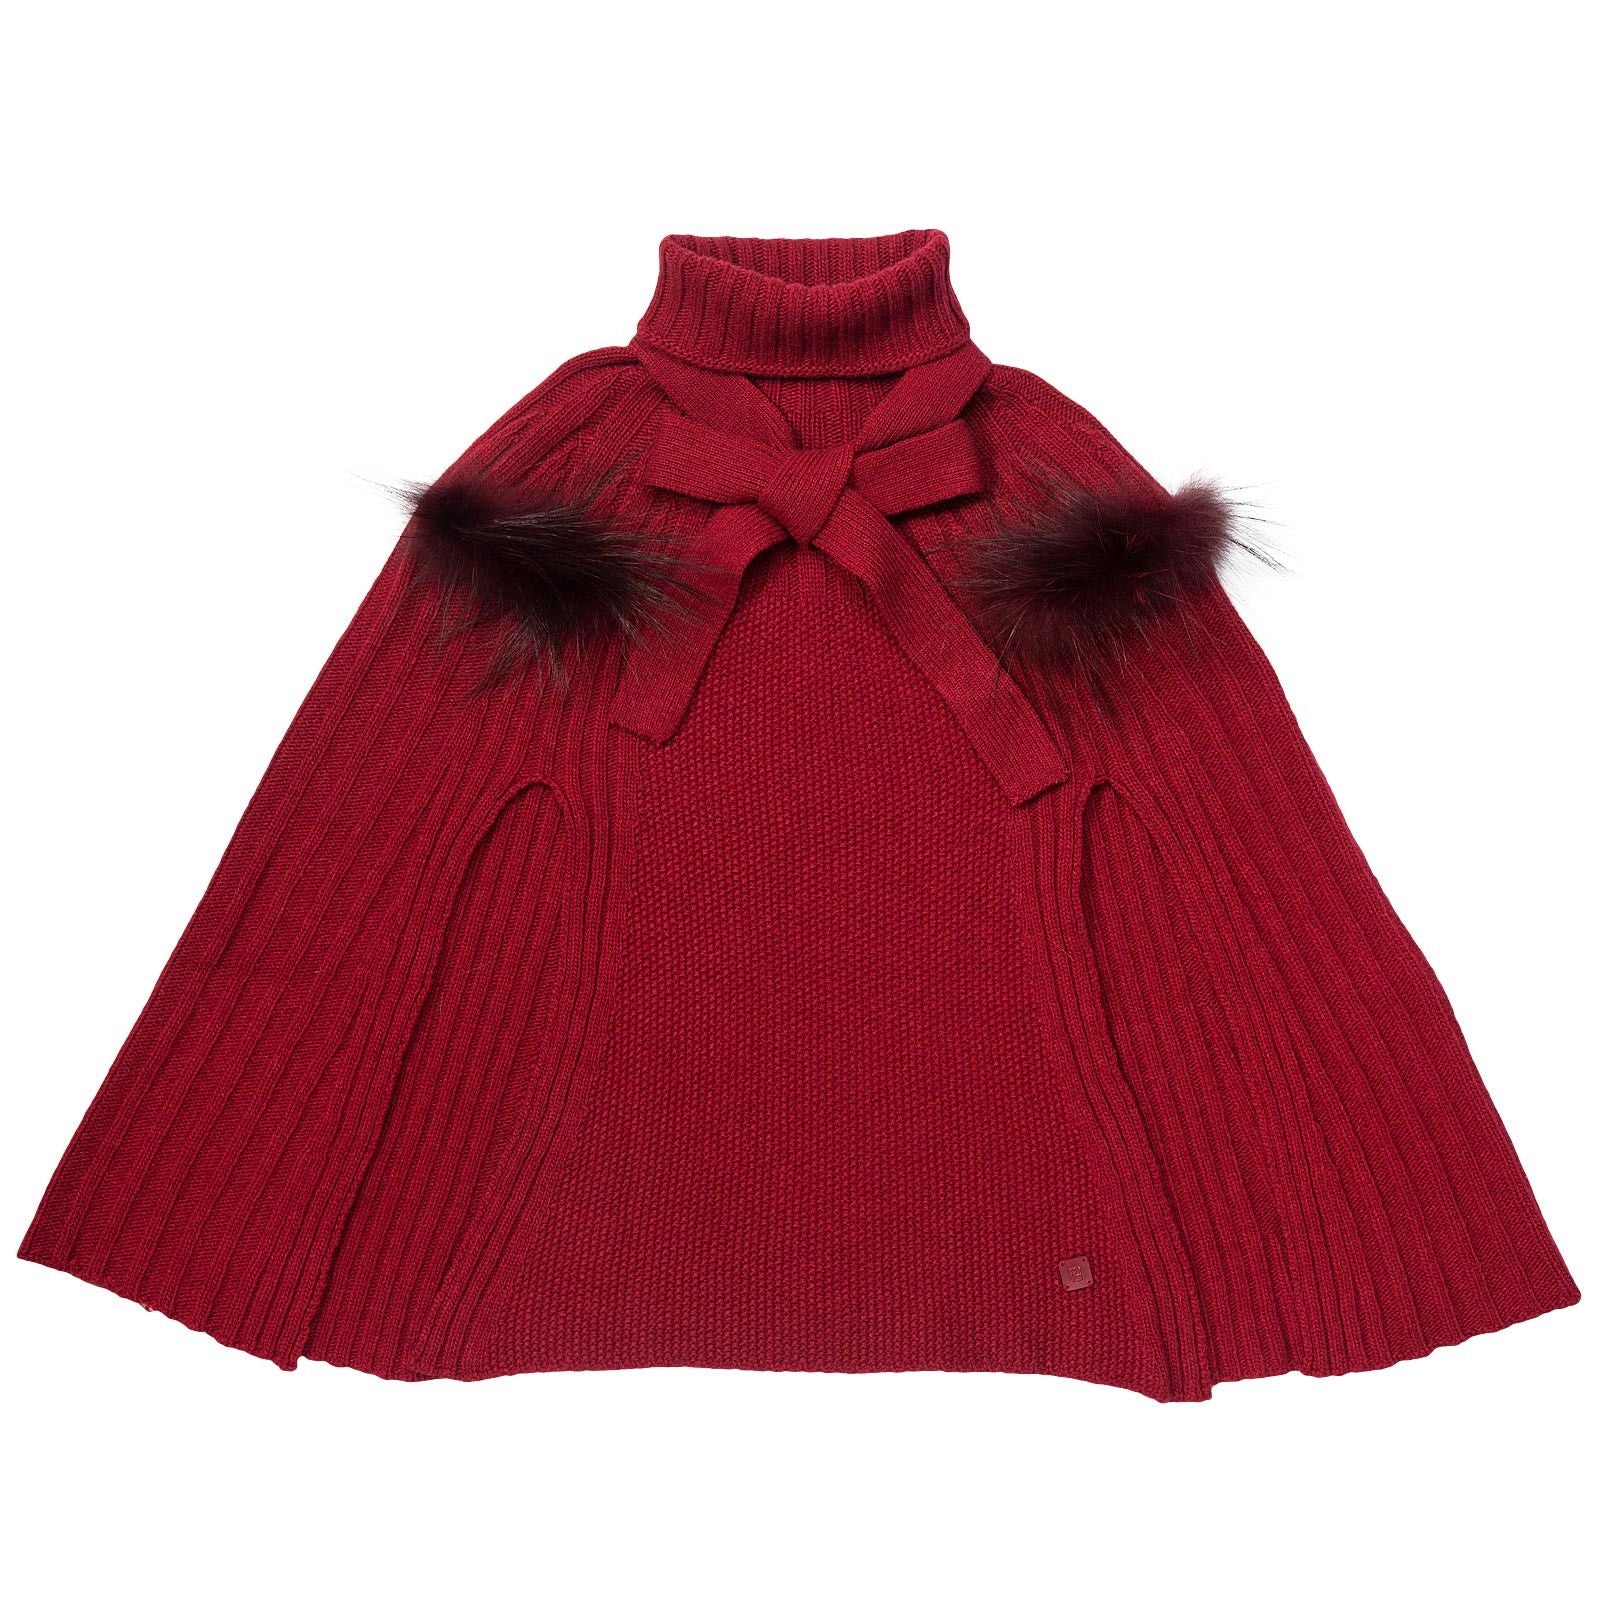 Girls Red Knitted Poncho With Fur Trims - CÉMAROSE | Children's Fashion Store - 1